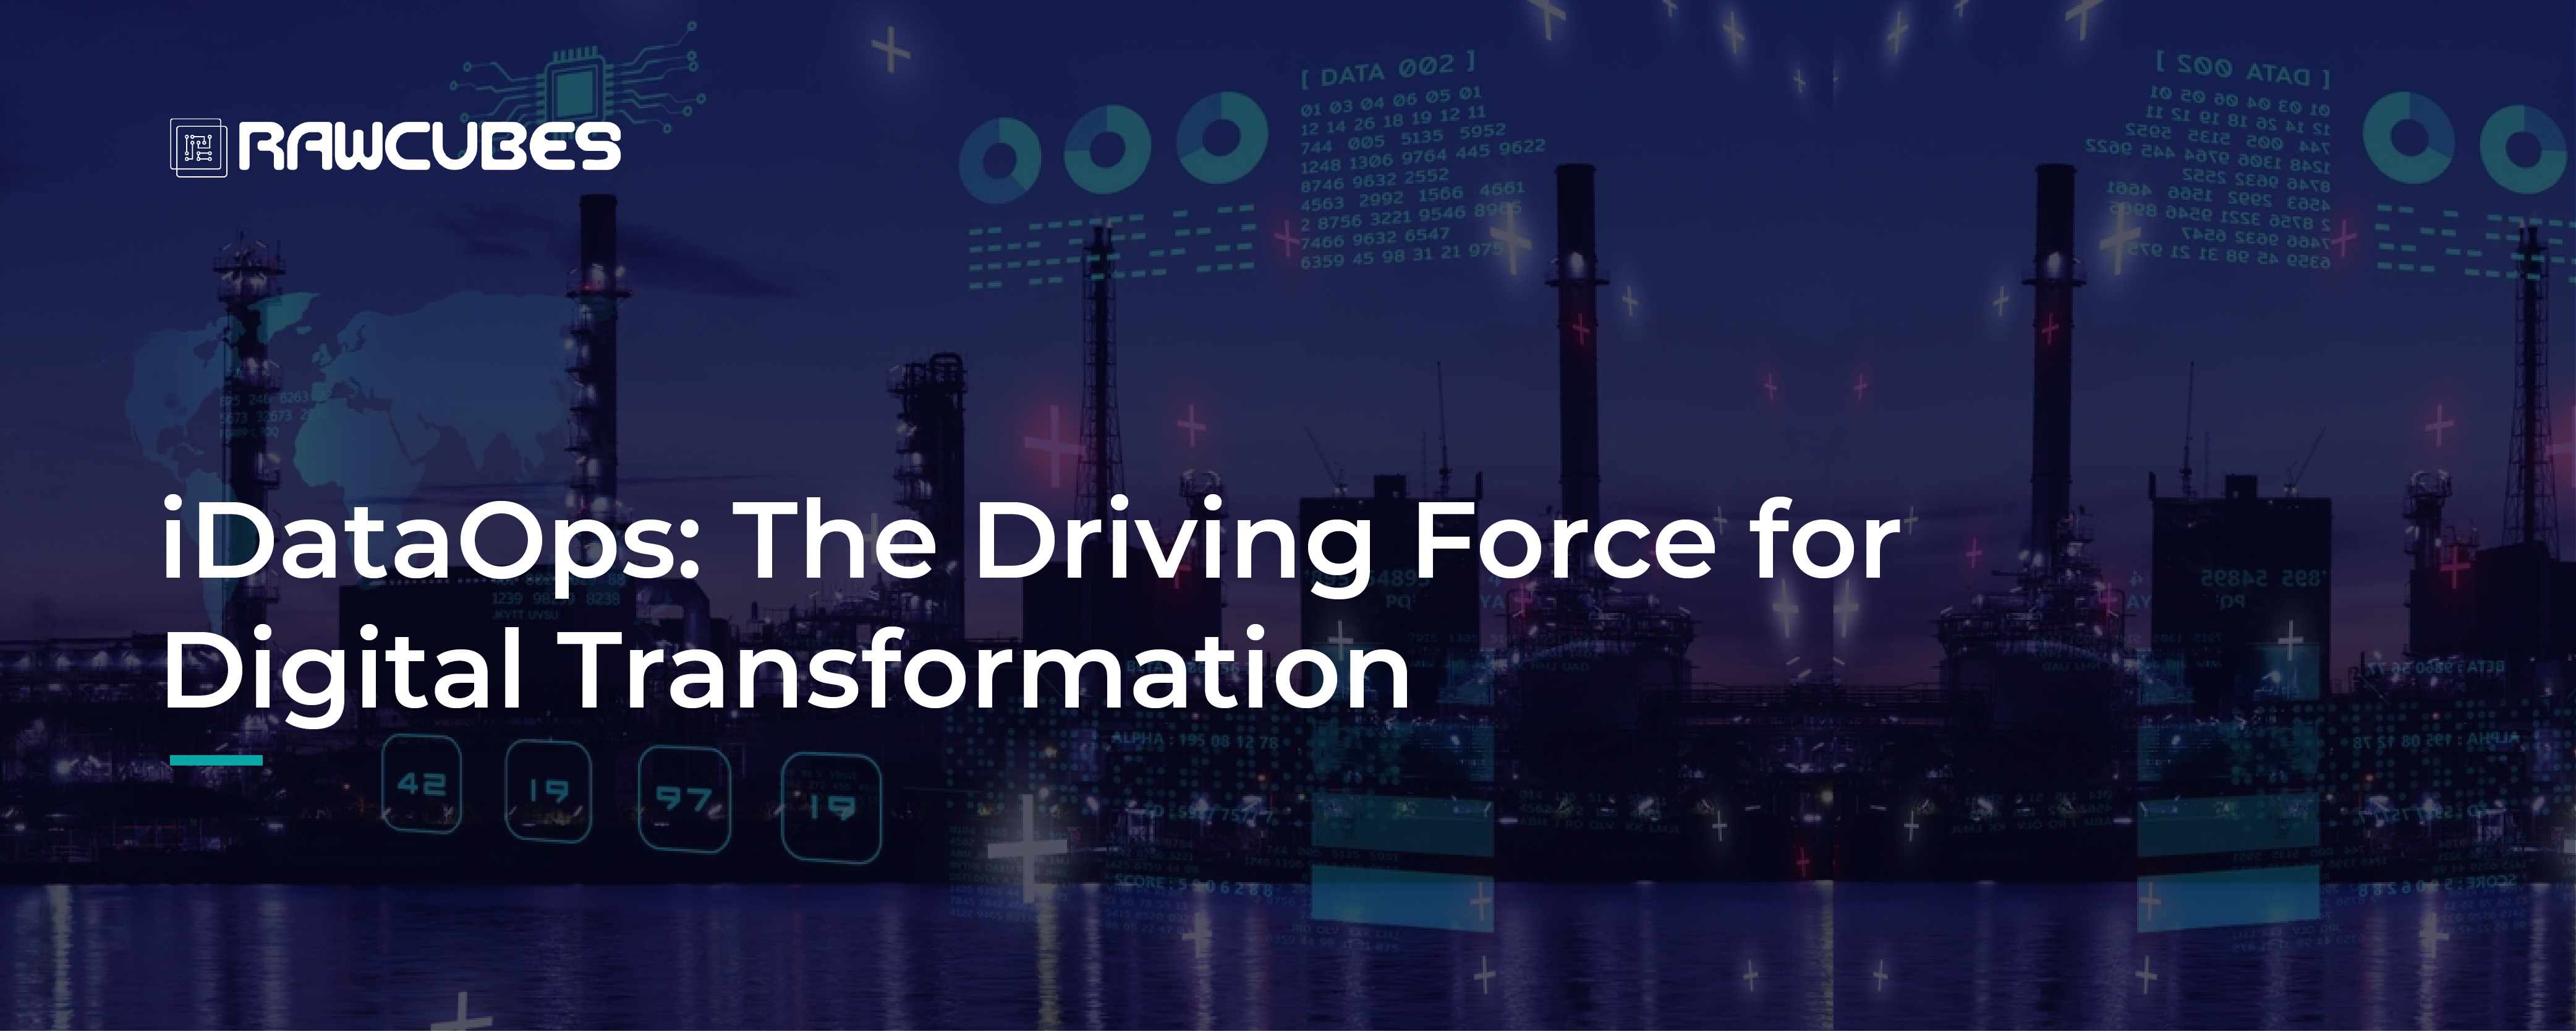 the driving force for digital transformation banner